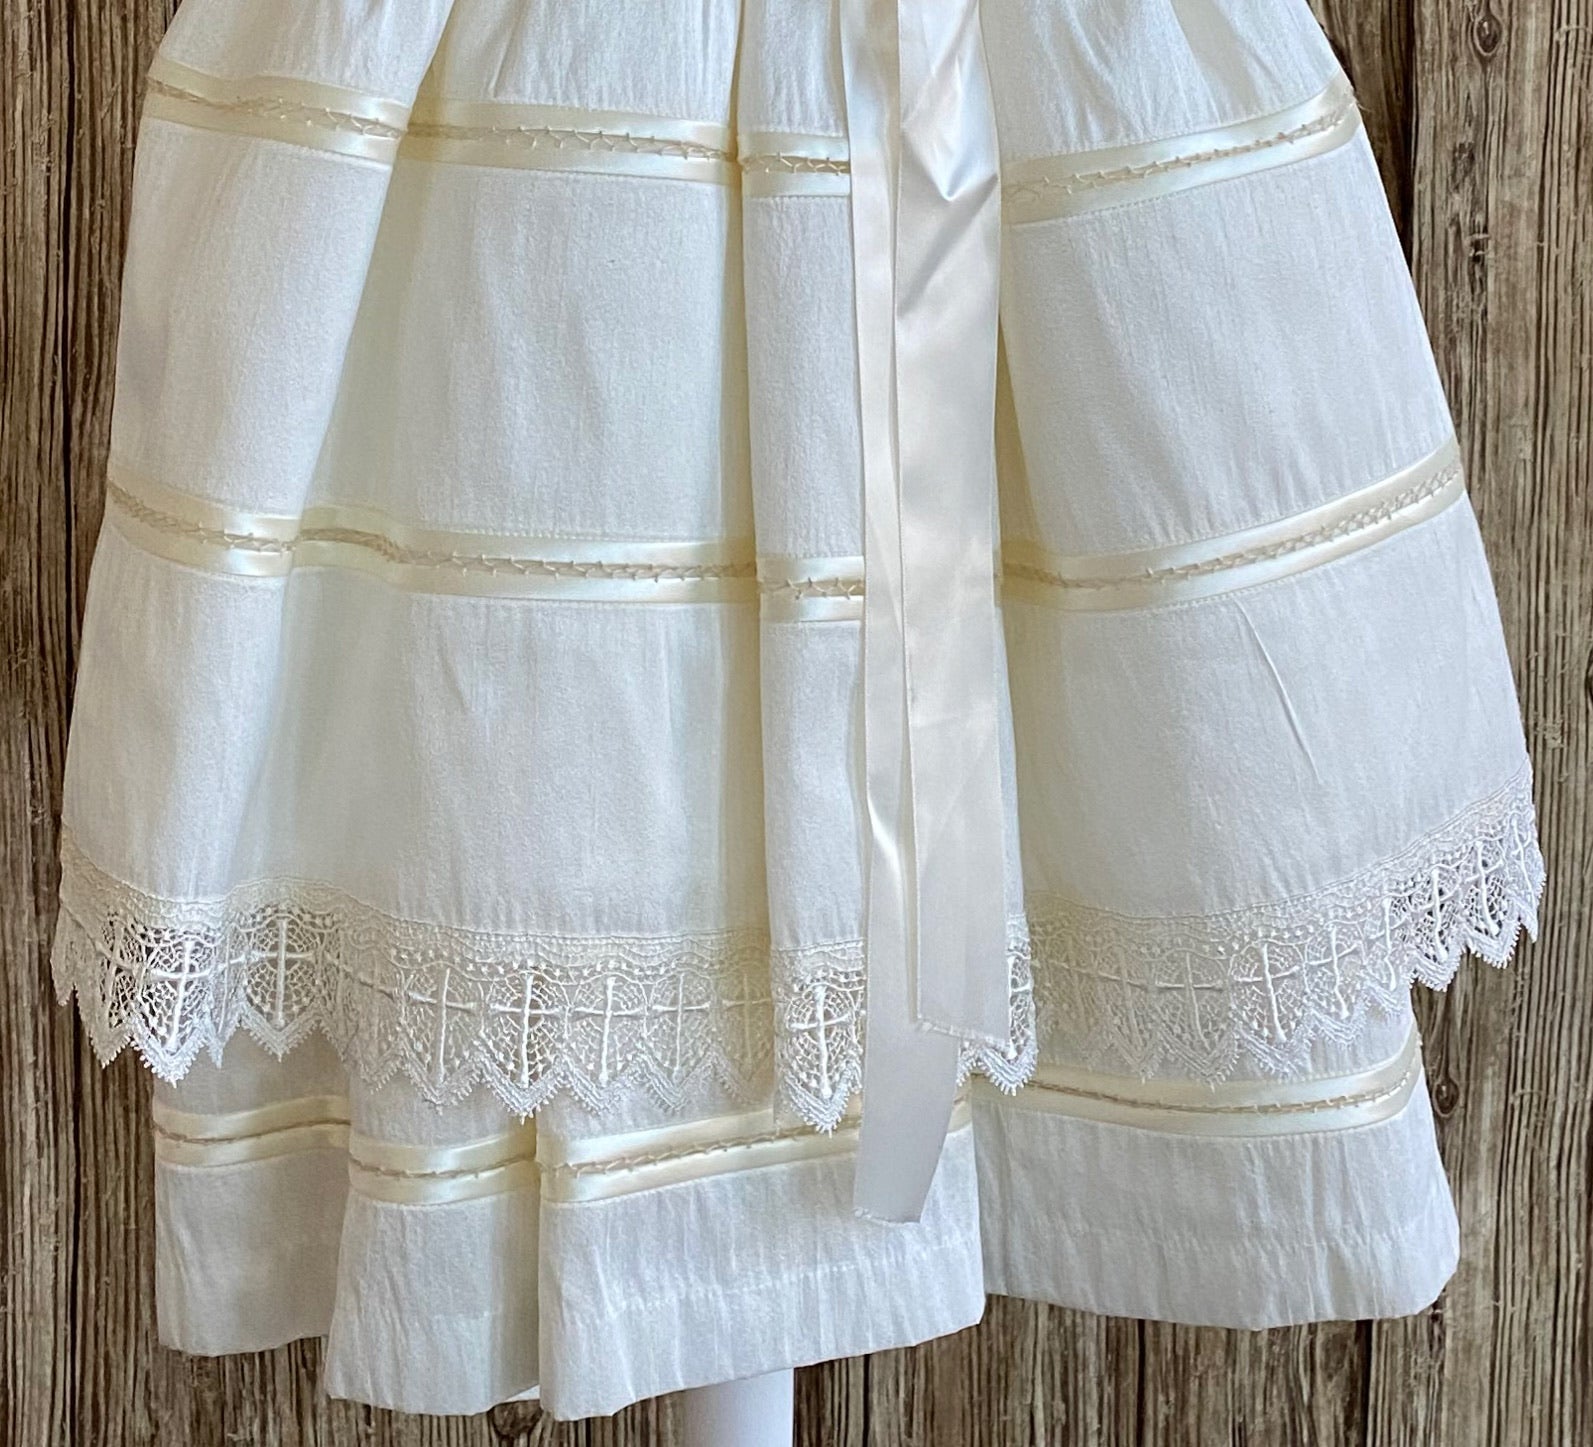 This a beautiful, one-of-a-kind baptism gown.  A lovely gown for a precious child.  Ivory, size 12M Satin bodice with hand embroidered floral design Handstitched layered cap sleeve Layered satin skirting with hemstitching between each layer Embroidered lace band around bottom layer  Long satin ribbon for bow